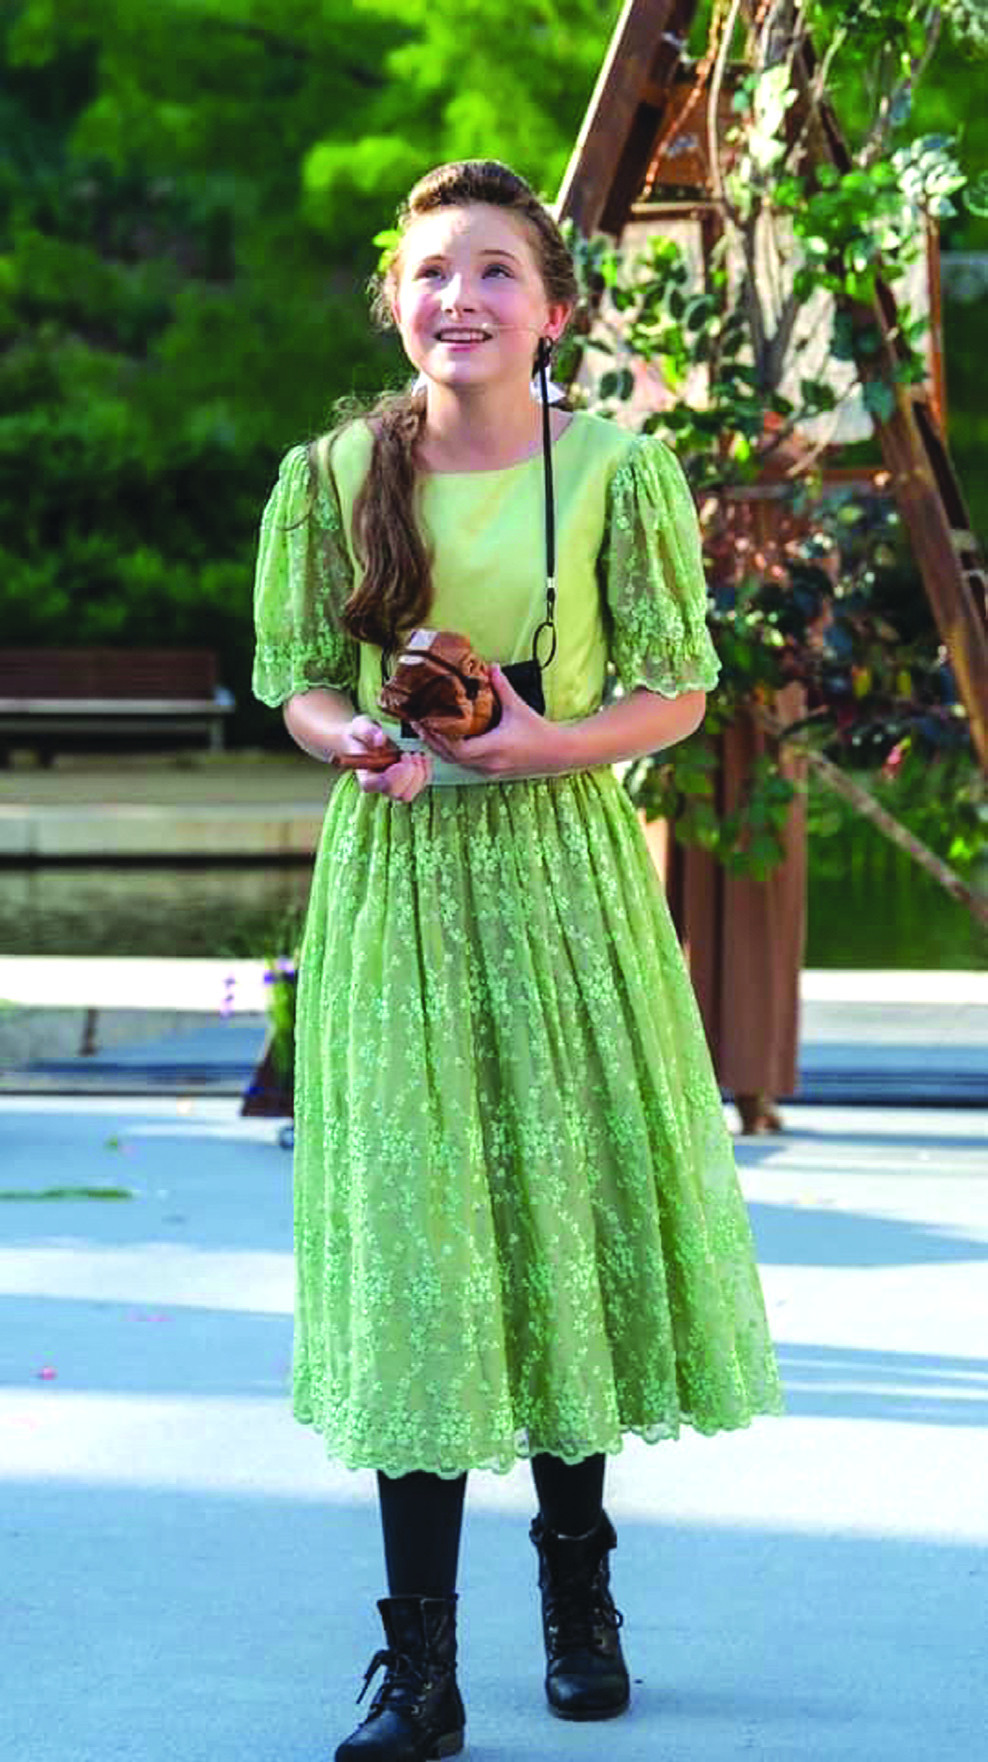 Samantha Rother performs in “Tuck Everlasting.” Rother has appeared in 37 shows, and she is preparing for more. Provided